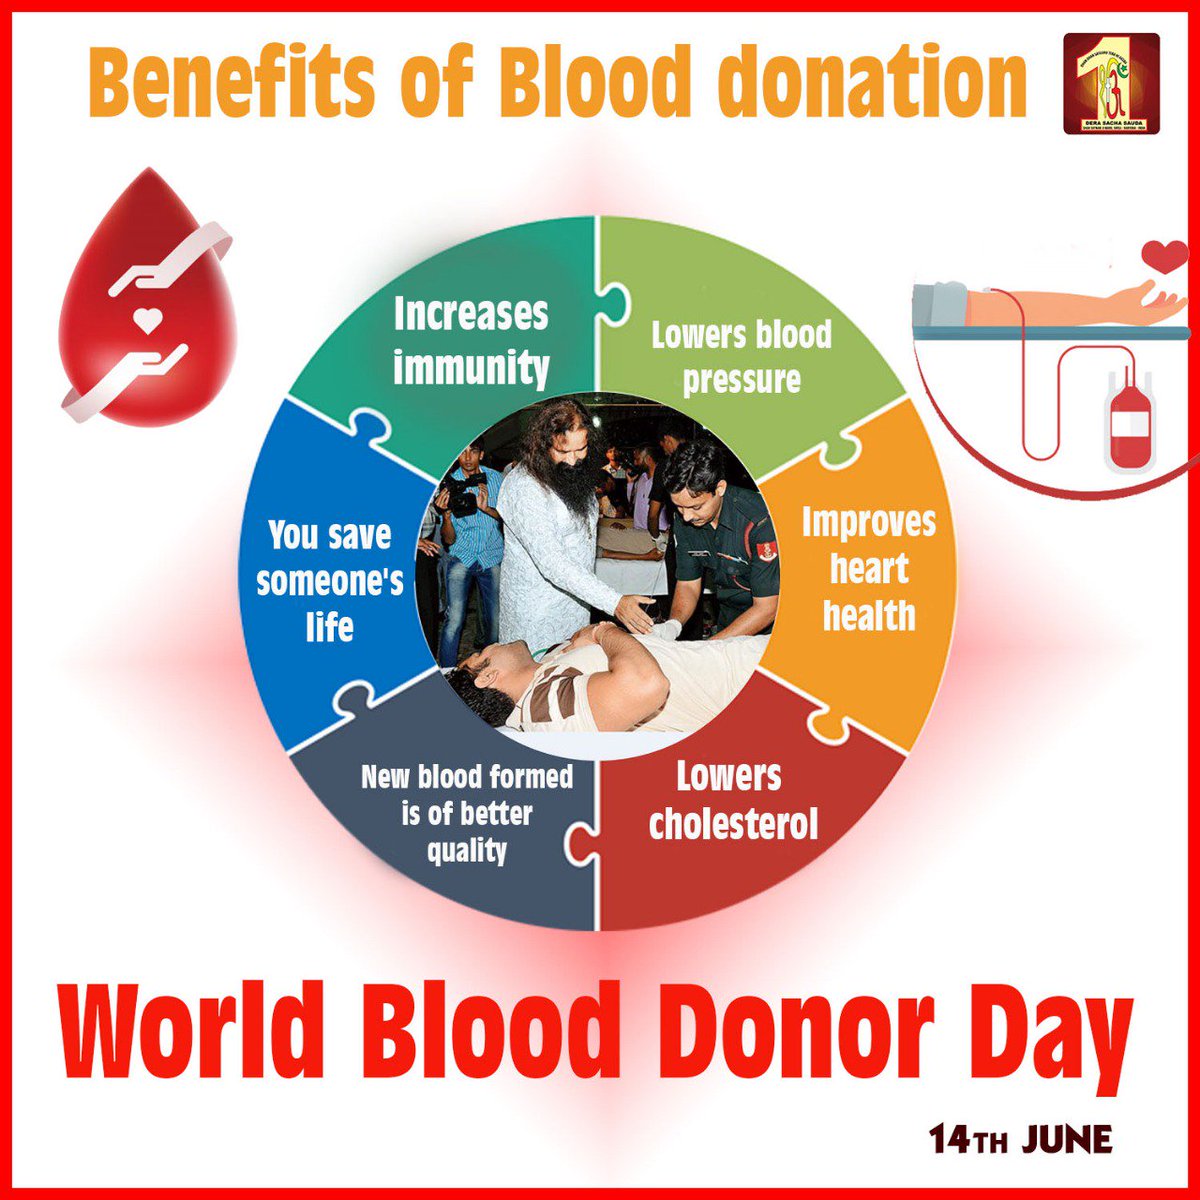 Yours one time blood donation can save upto 3 lives.
So, save lives by donation blood on this
The aim behind the blood donation camp is that no life gone with lack of blood.
#WorldBloodDonorDay #WorldBloodDonorDay2019 #Worldblood_Donorday